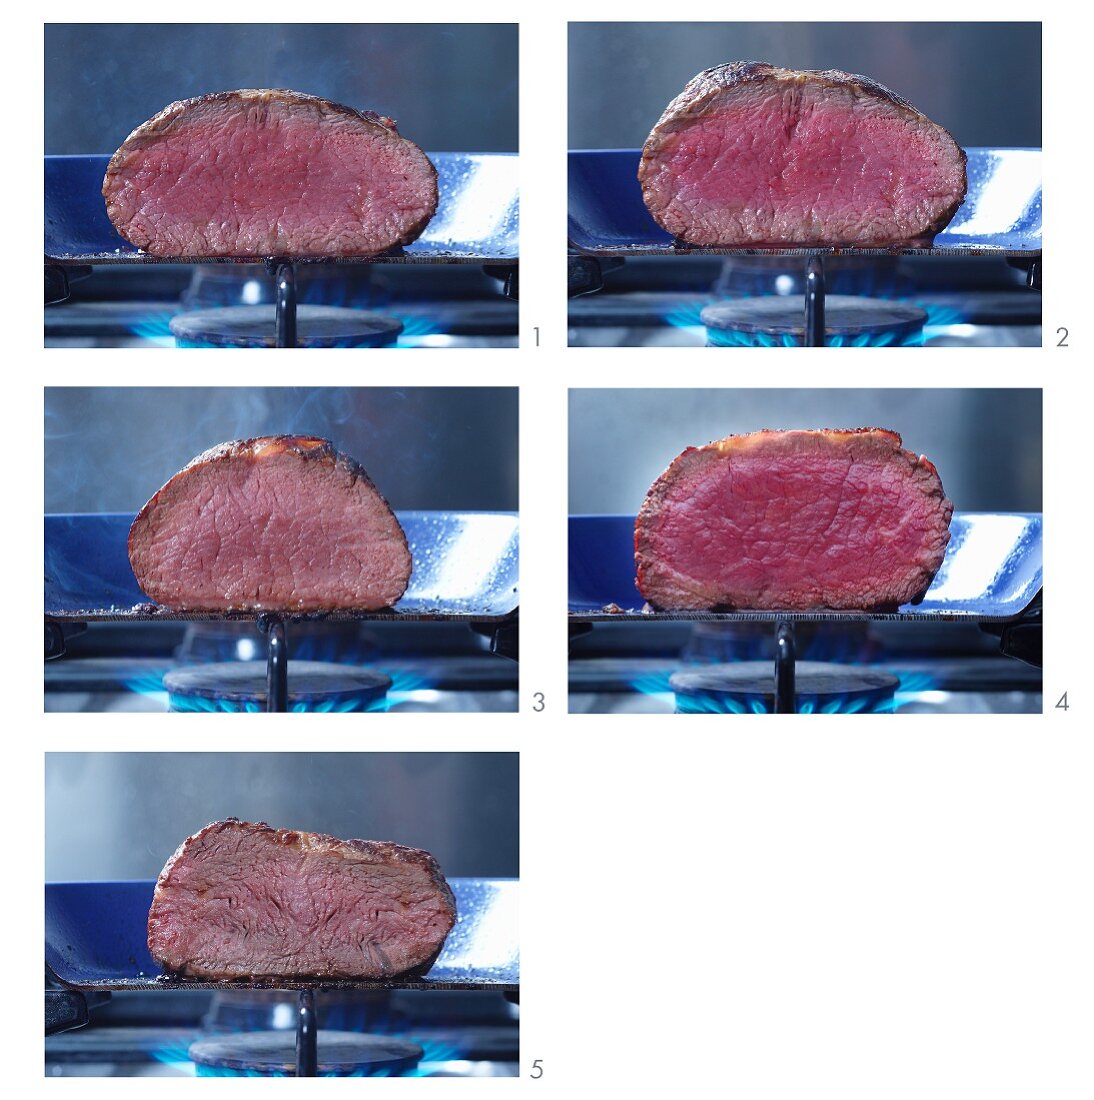 Beef steak, cooked to different degrees